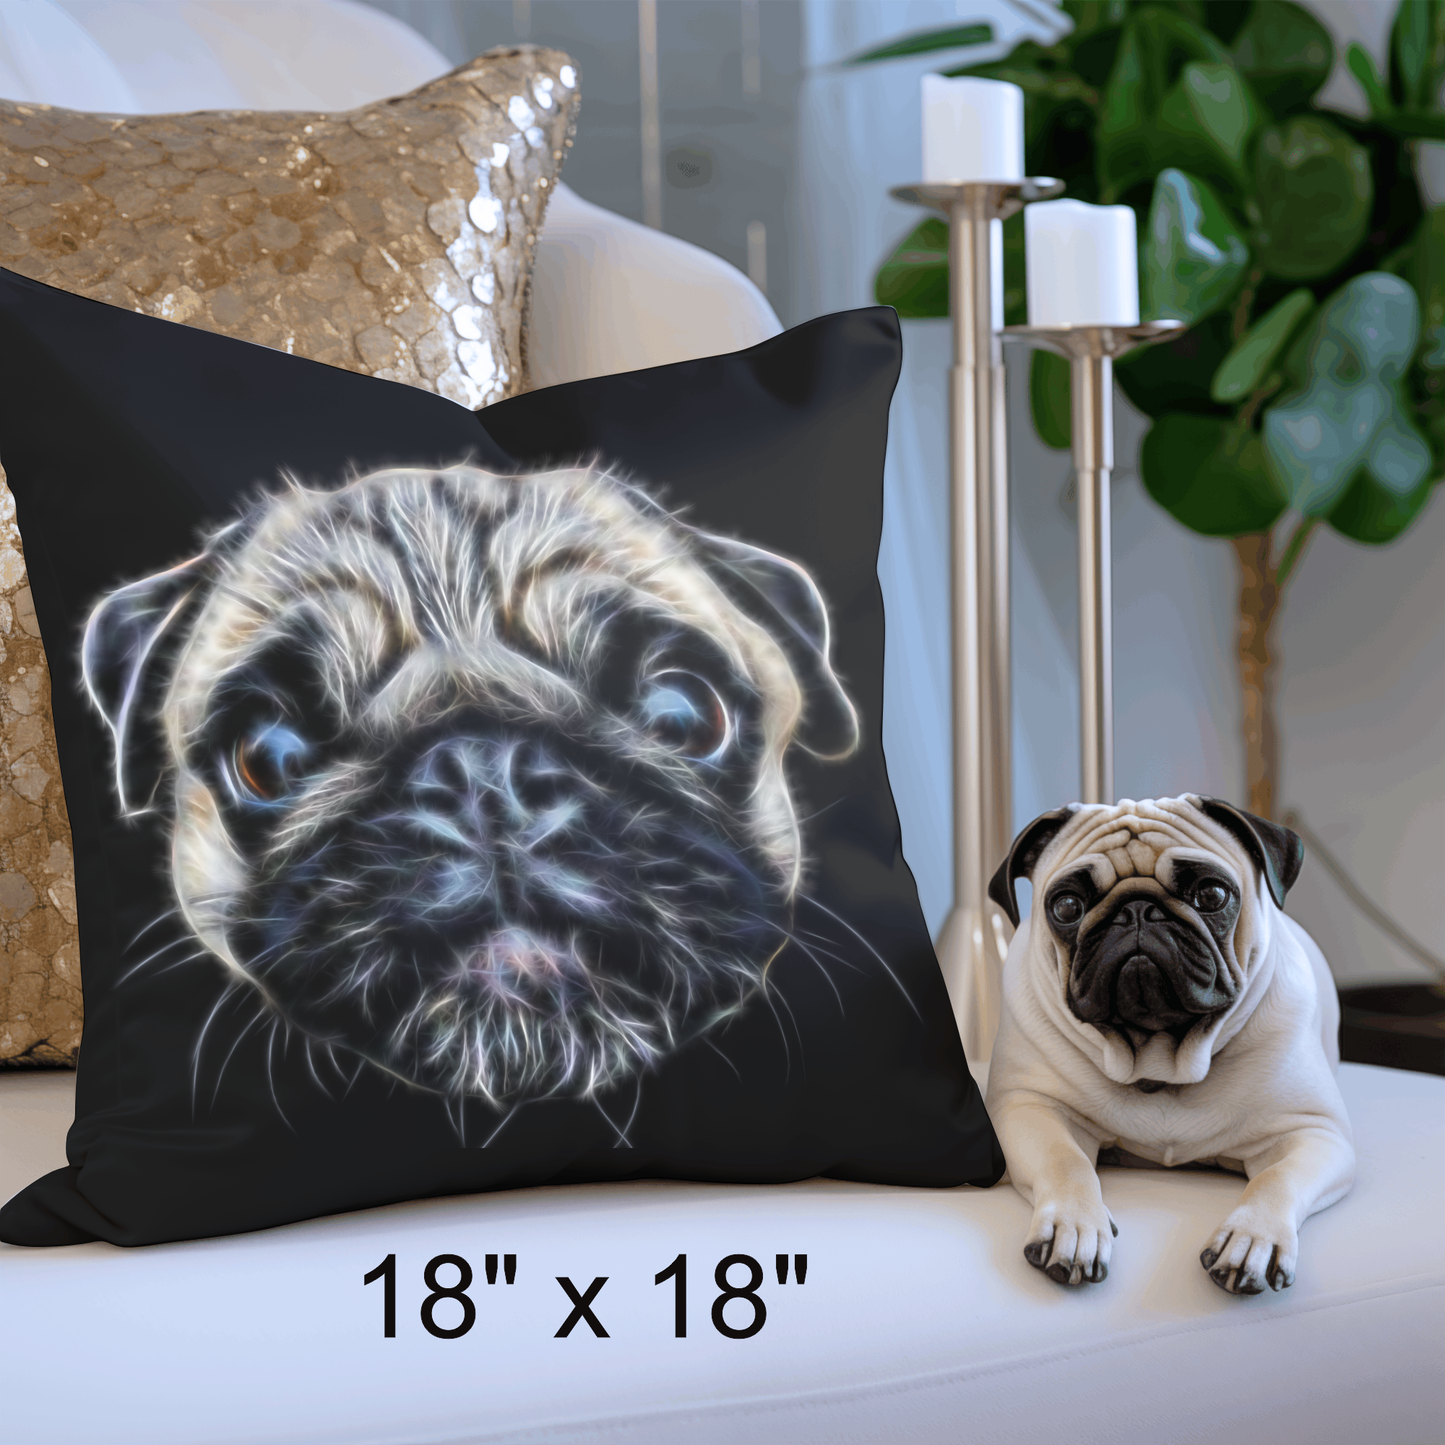 Chocolate Cockapoo Cushion with Pillow Insert